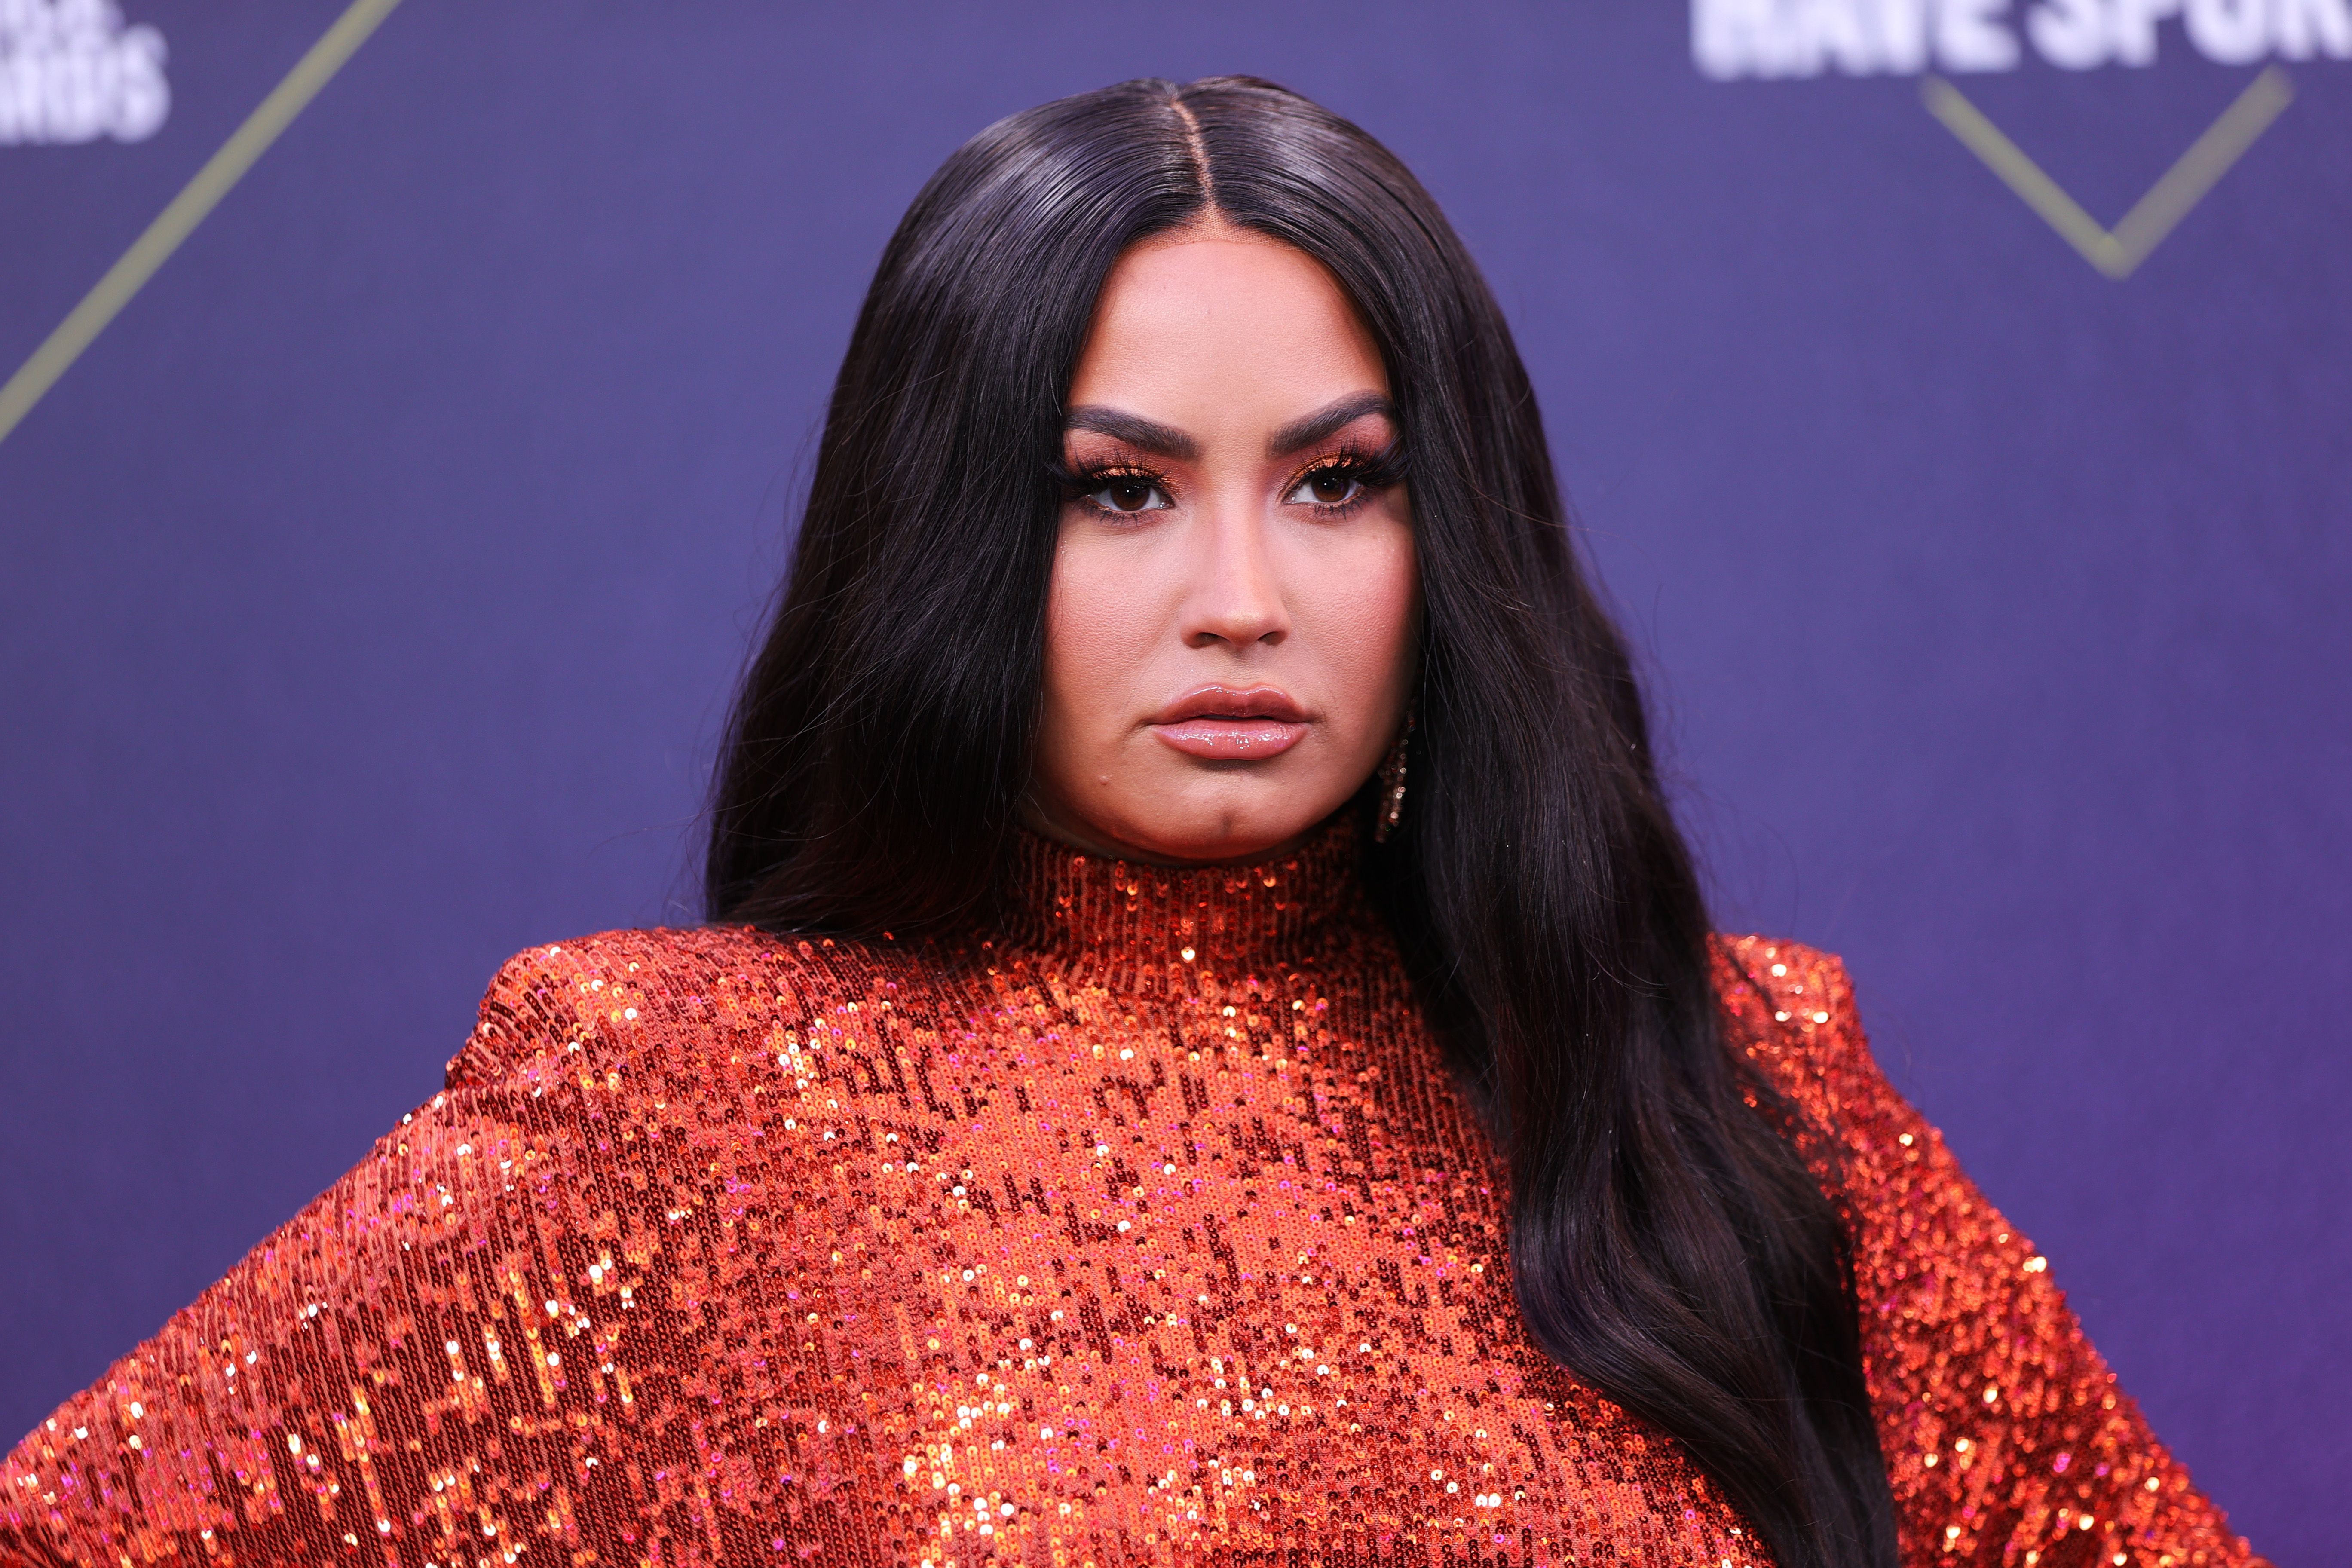 Demi Lovato at the 2020 E! People's Choice Awards in Santa Monica, California on Sunday, November 15, 2020 | Getty Images